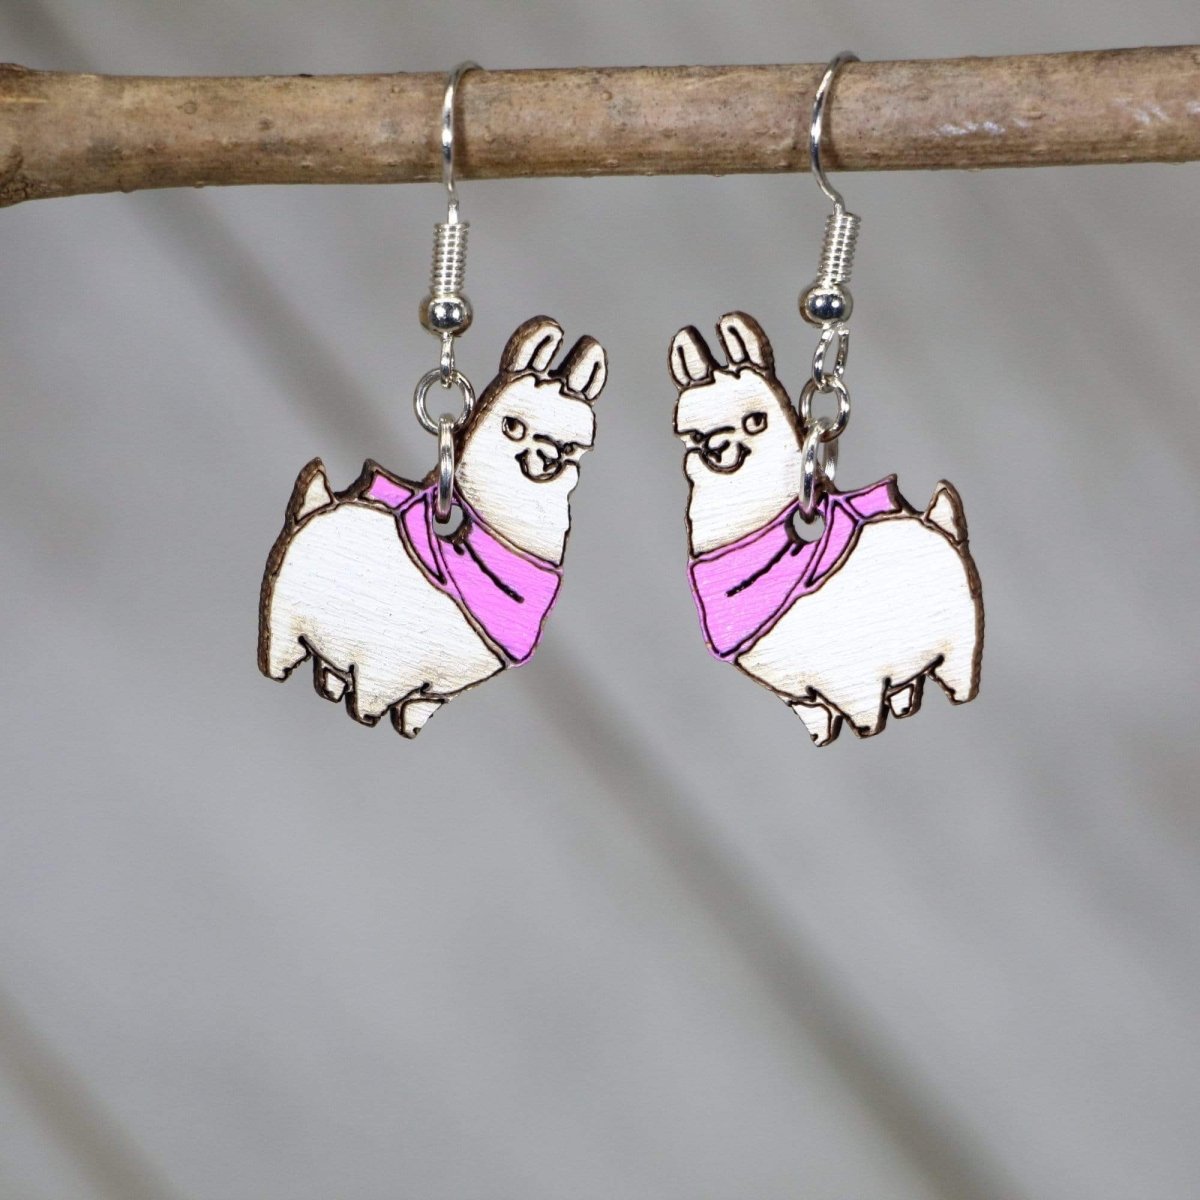 Llama with Scarf Wooden Dangle Earrings - Bright Pink - Cate's Concepts, LLC